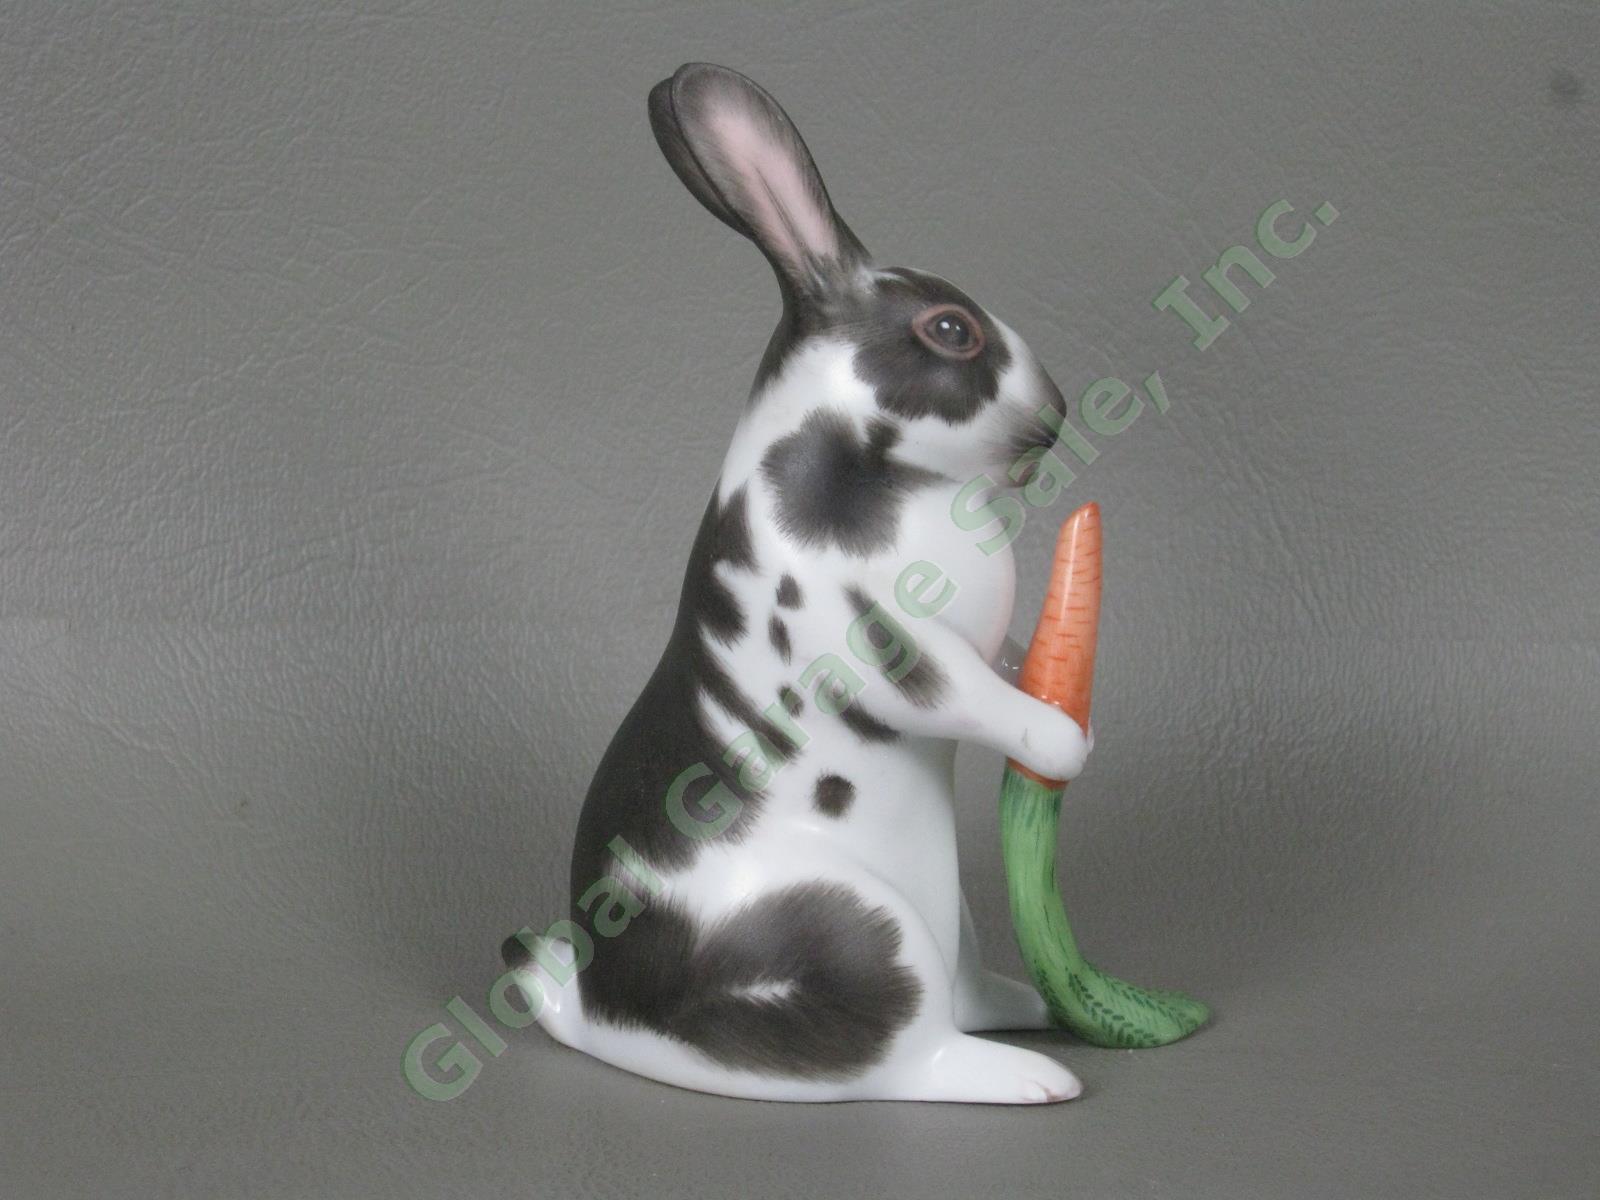 2005 Herend Black & White Porcelain 3.75" Bunny Rabbit With Carrot Figurine NR!